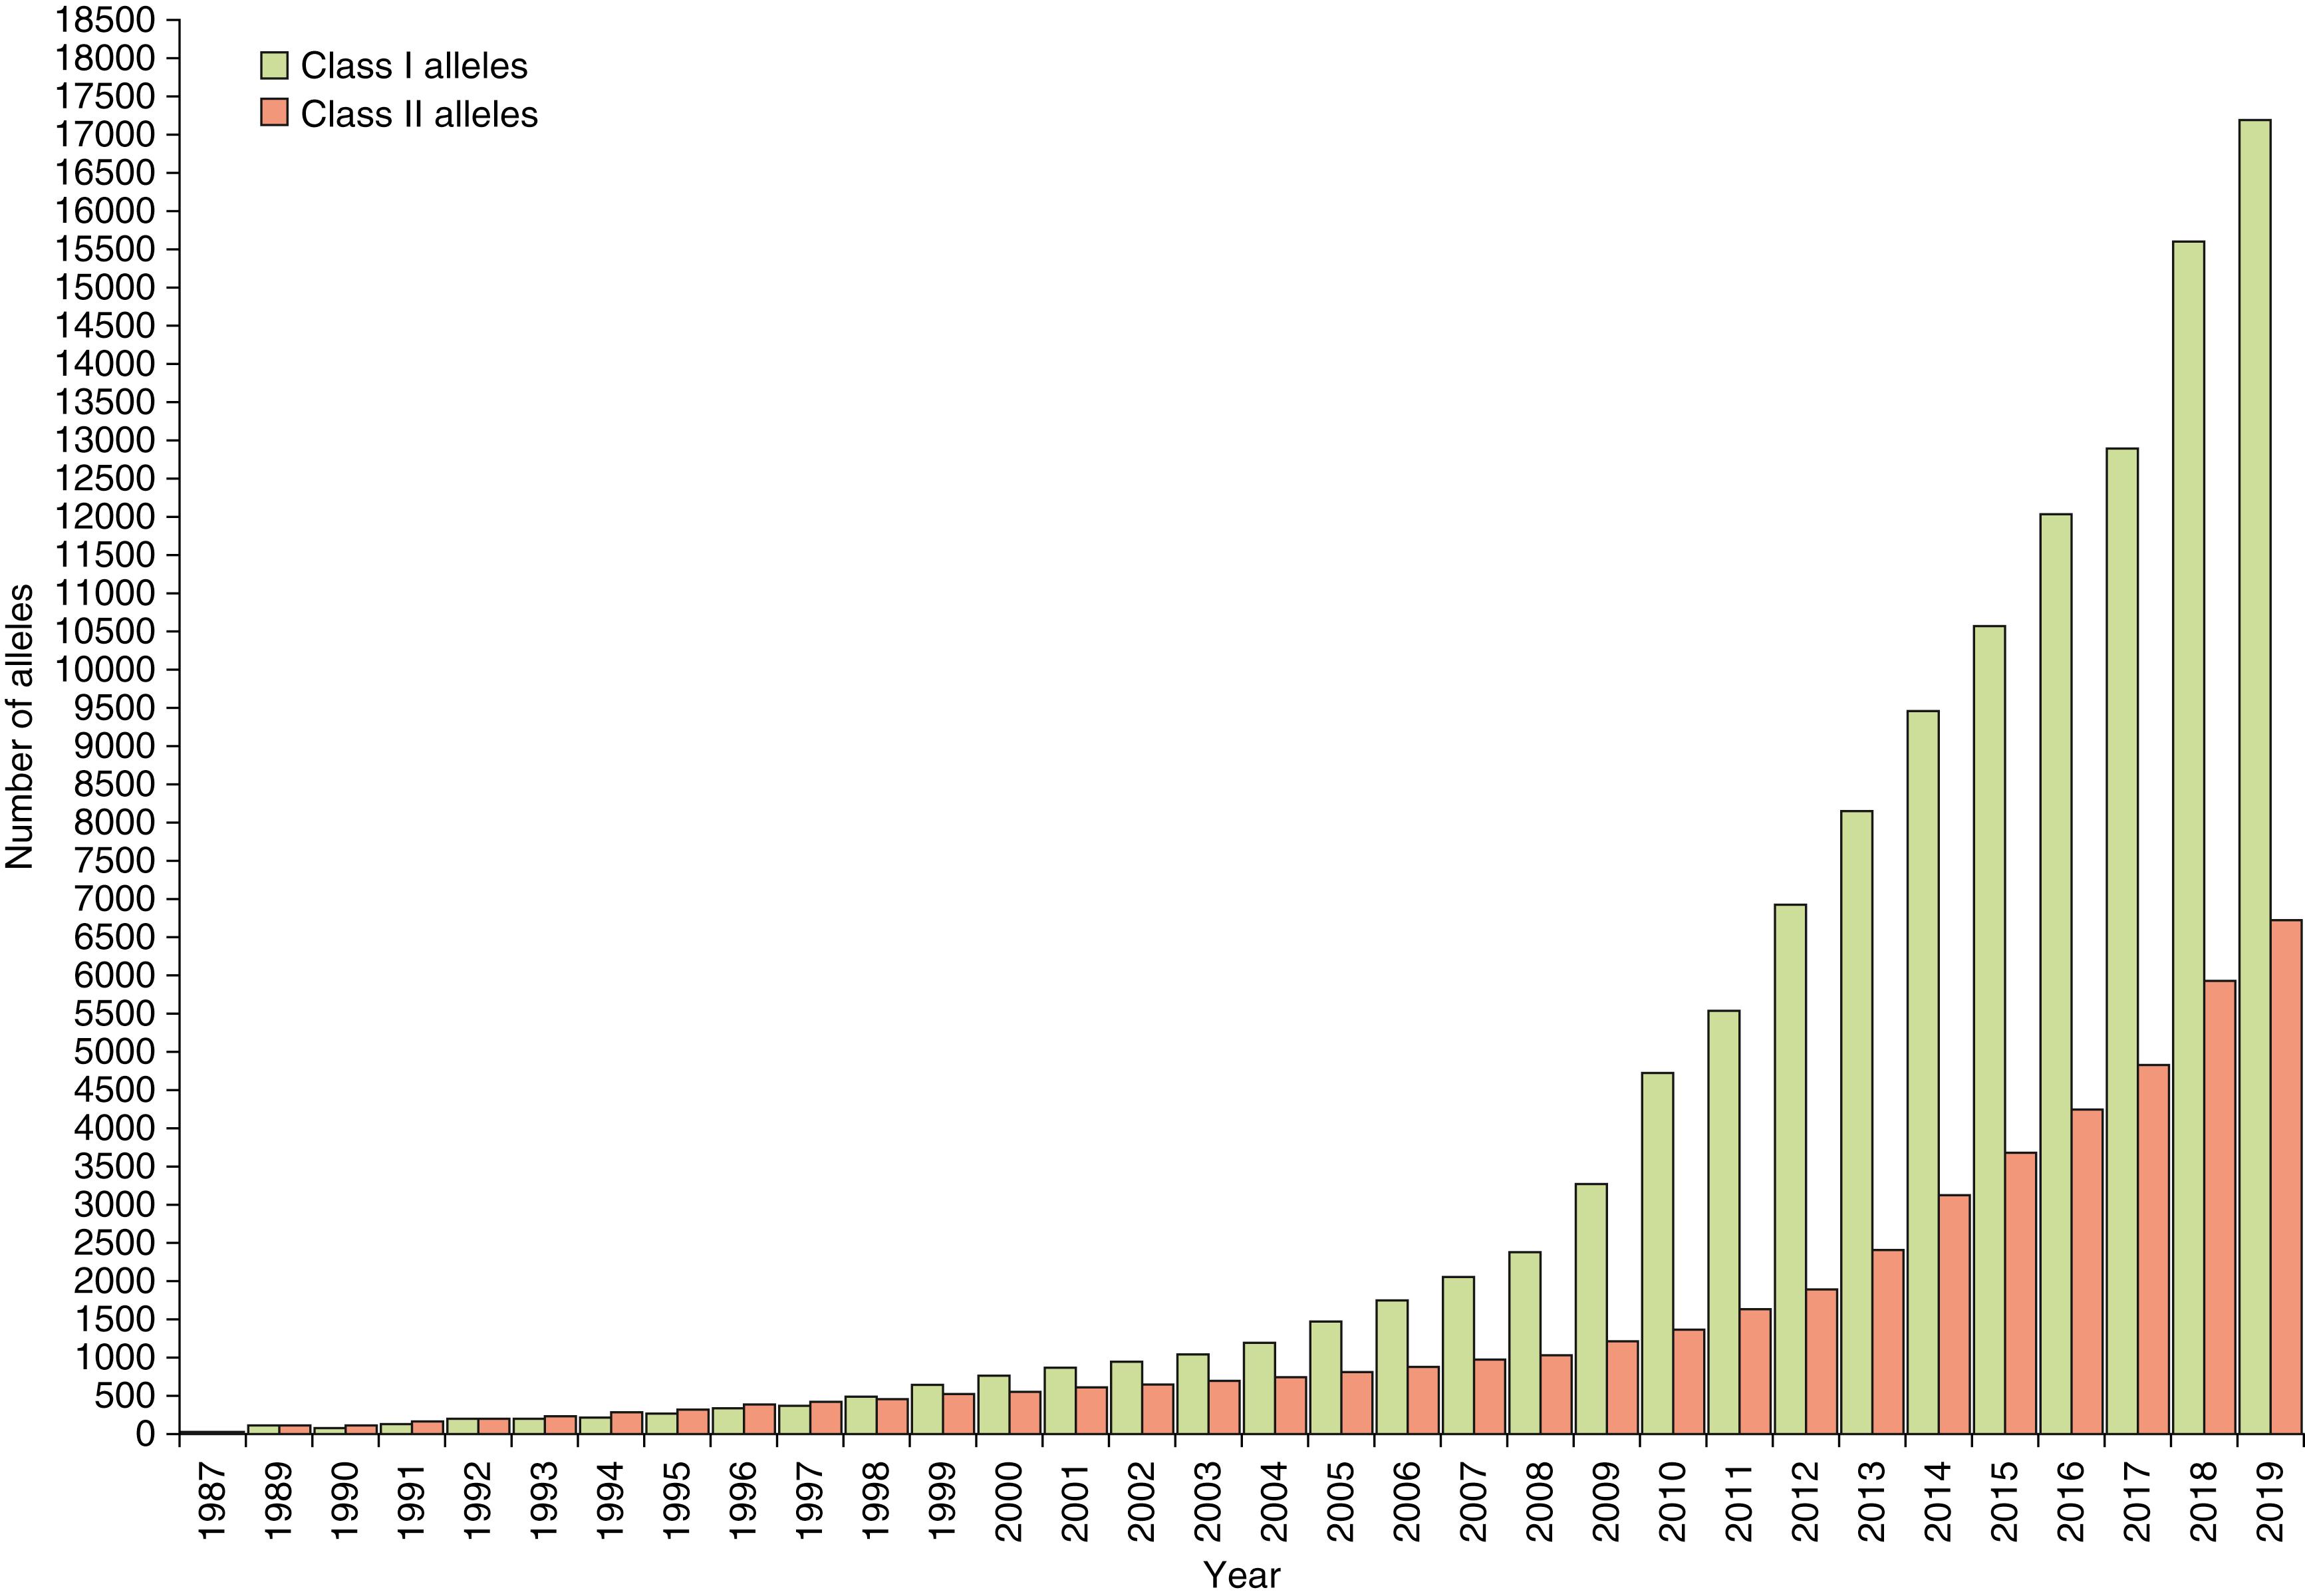 Fig. 50.3, Numbers of class I and class II alleles discovered from 1987 to 2019. The increase in the number of discovered alleles during this period was made possible by the introduction of DNA typing methods; class I alleles include HLA-A, -B, and -Cw; class II alleles include HLA-DRB1, -DQB1, -DQA1, -DPA1, and -DPB1.